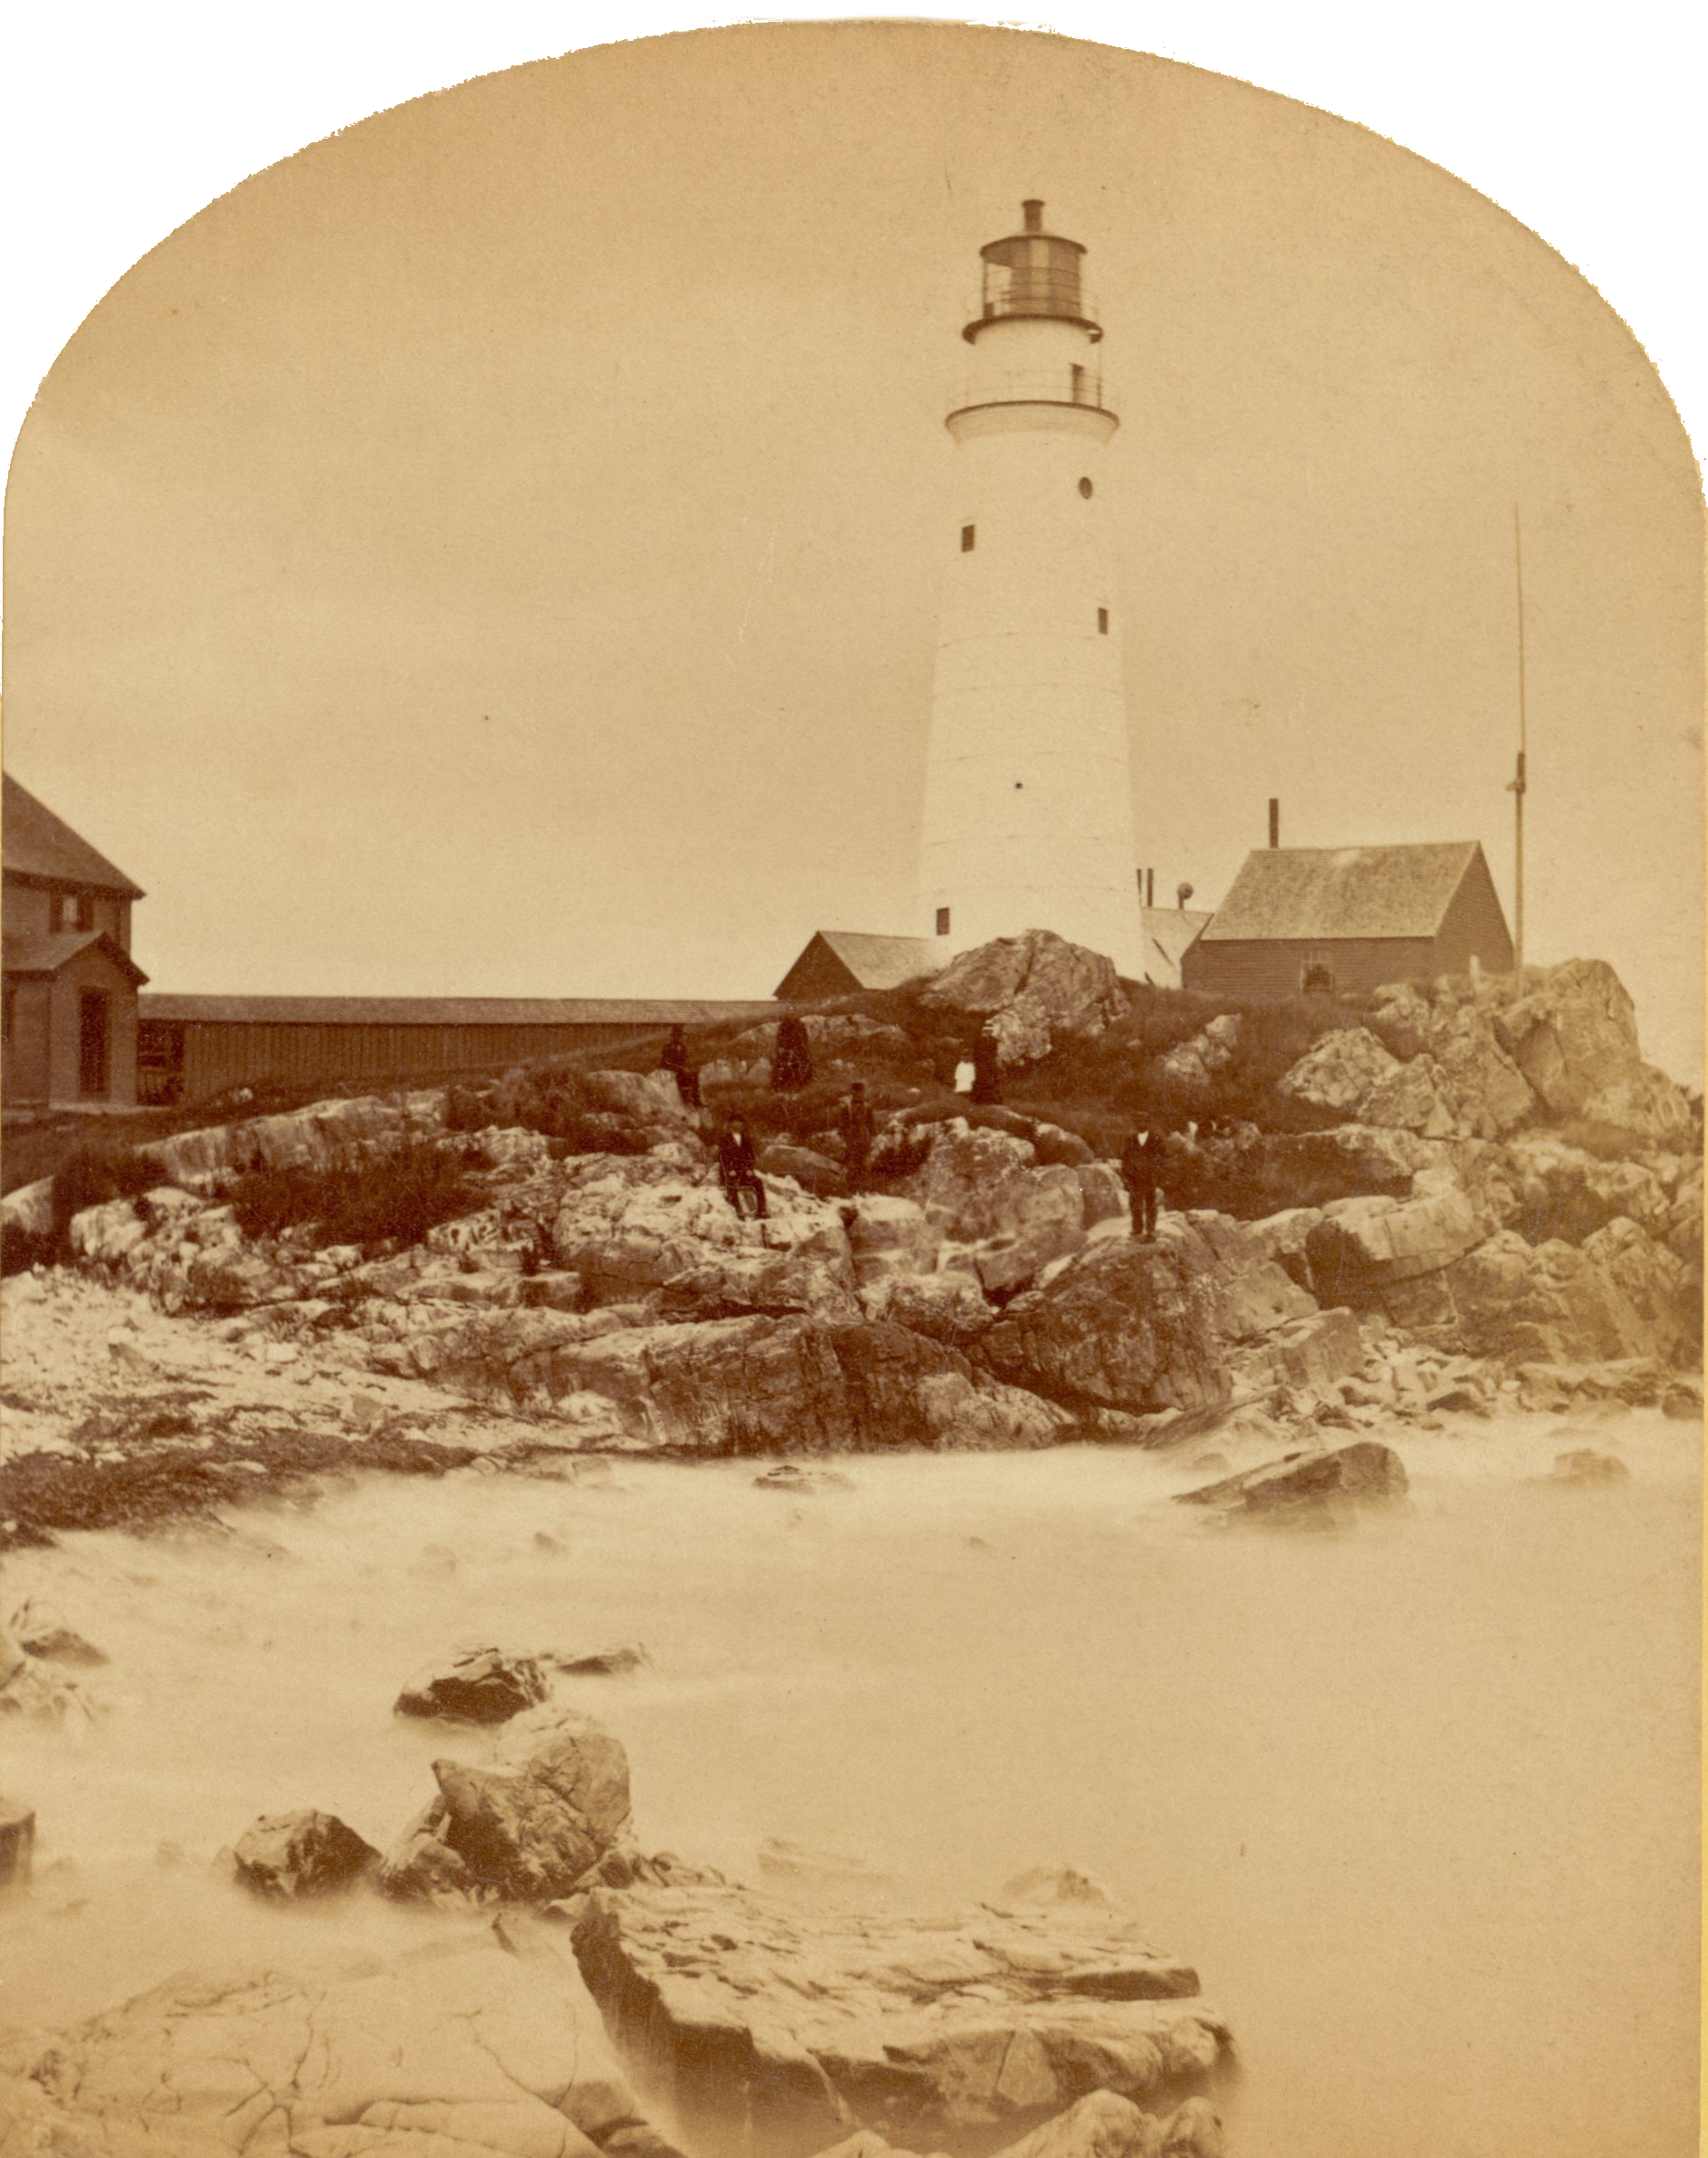 Boston Light House in Boston Harbor, with people standing and sitting on large rocks in front of it.